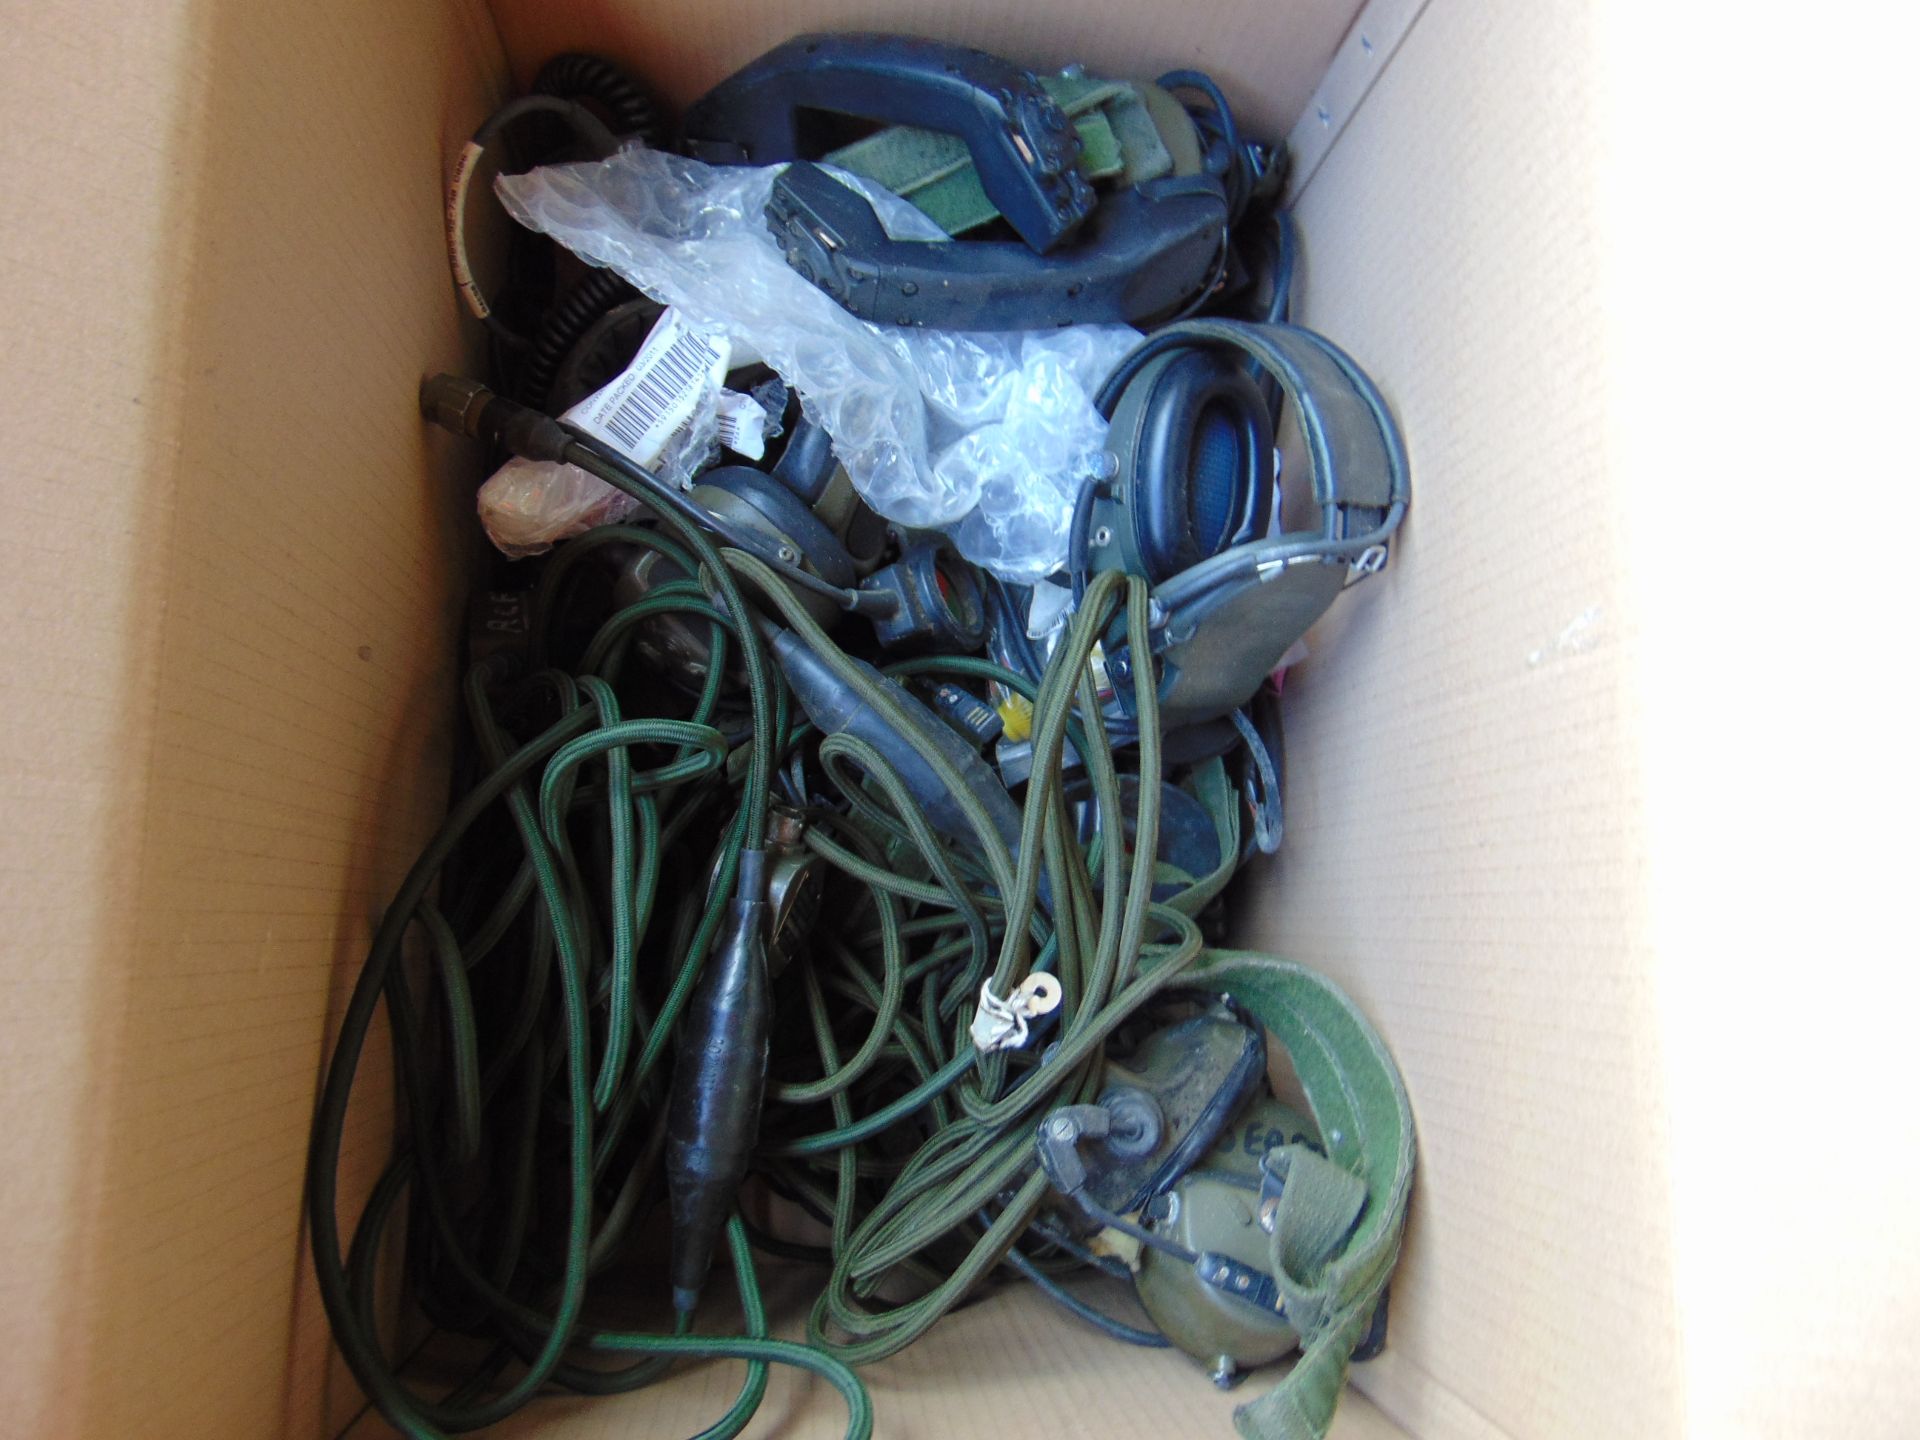 1x Box of Clansman Headsets Handsets etc - Image 4 of 4